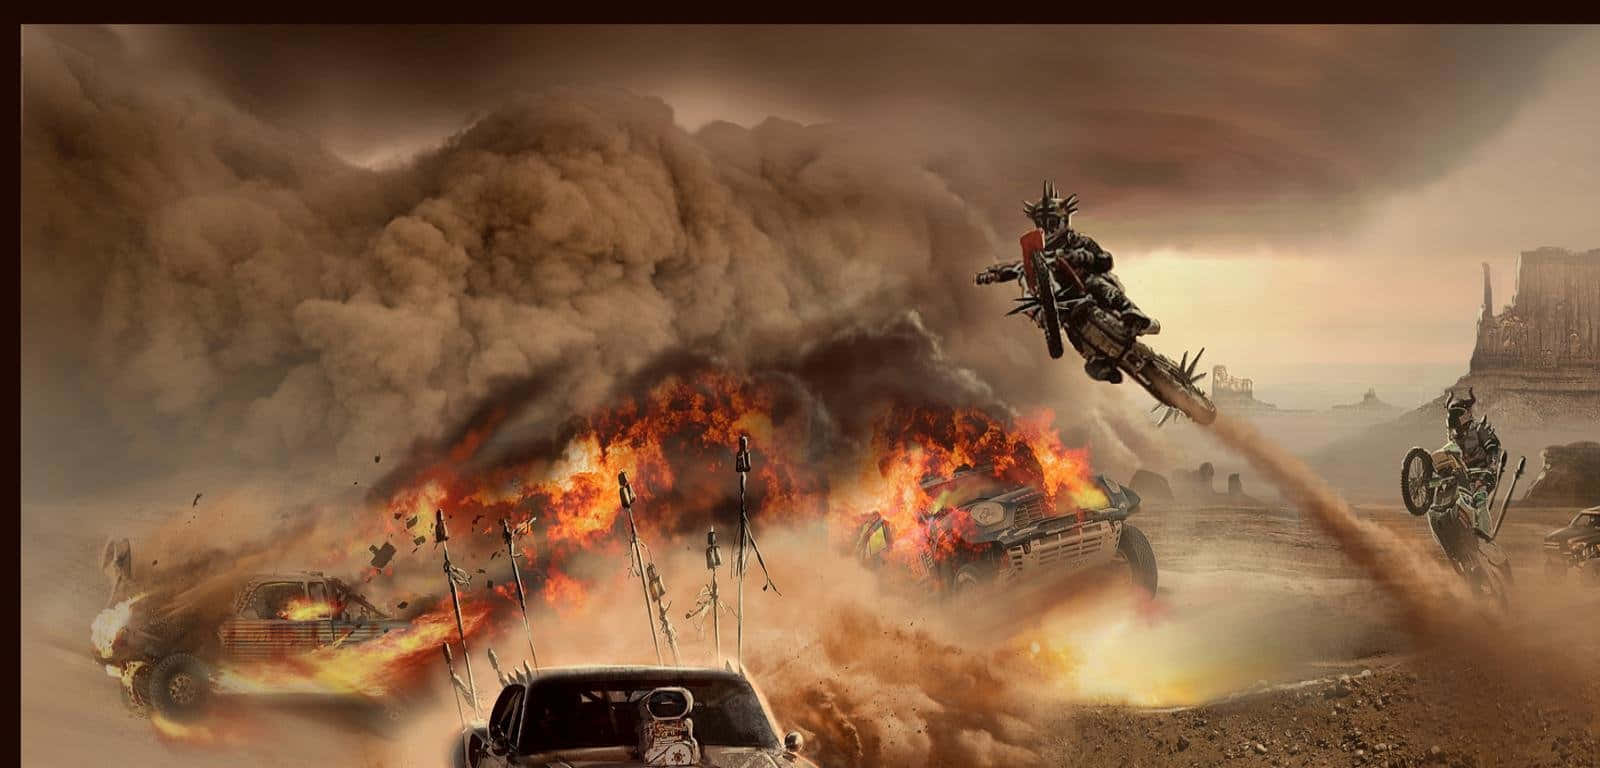 Action-packed Face-off In Mad Max: Fury Road Wallpaper